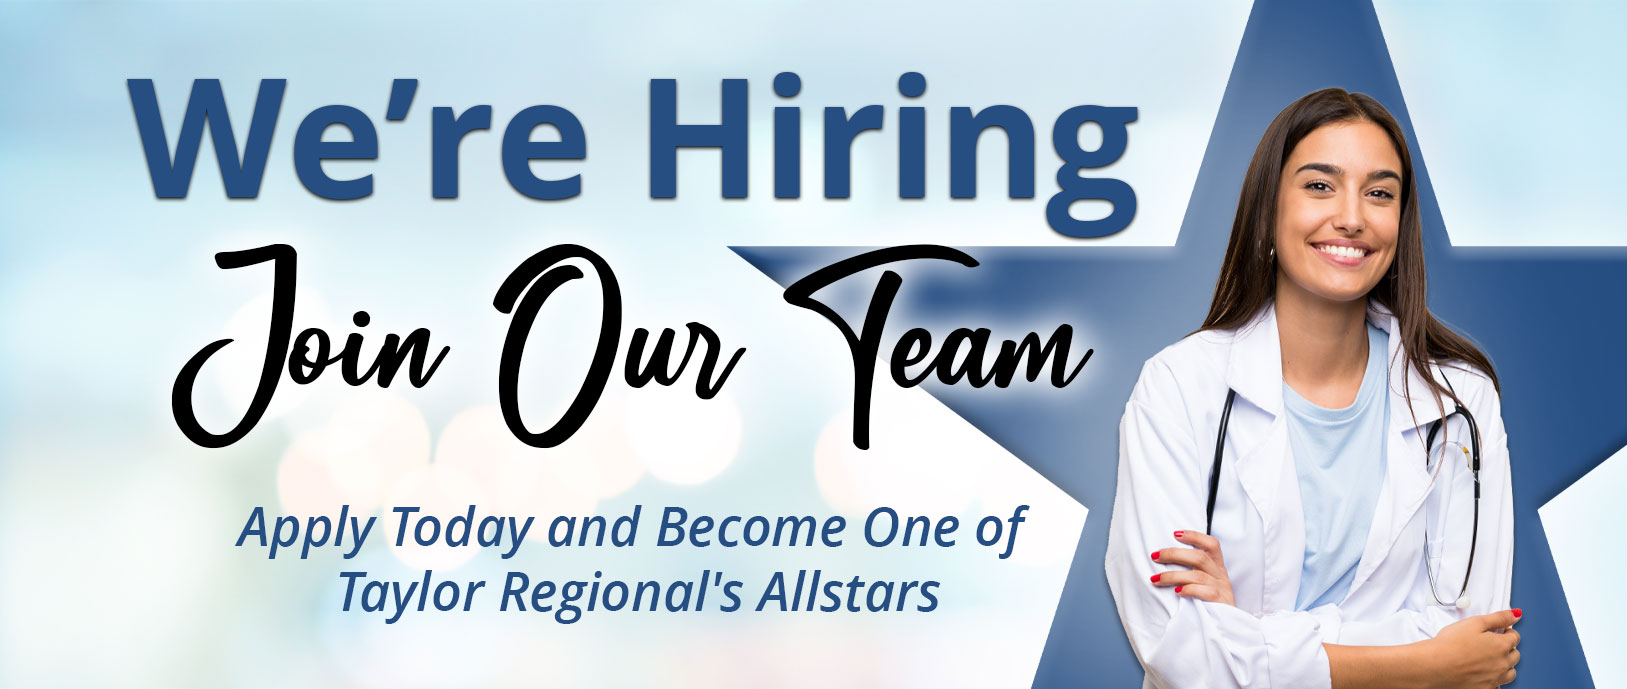 We're Hiring
Join Our Team
Apply Today and Become one of Taylor Regional's Allstars